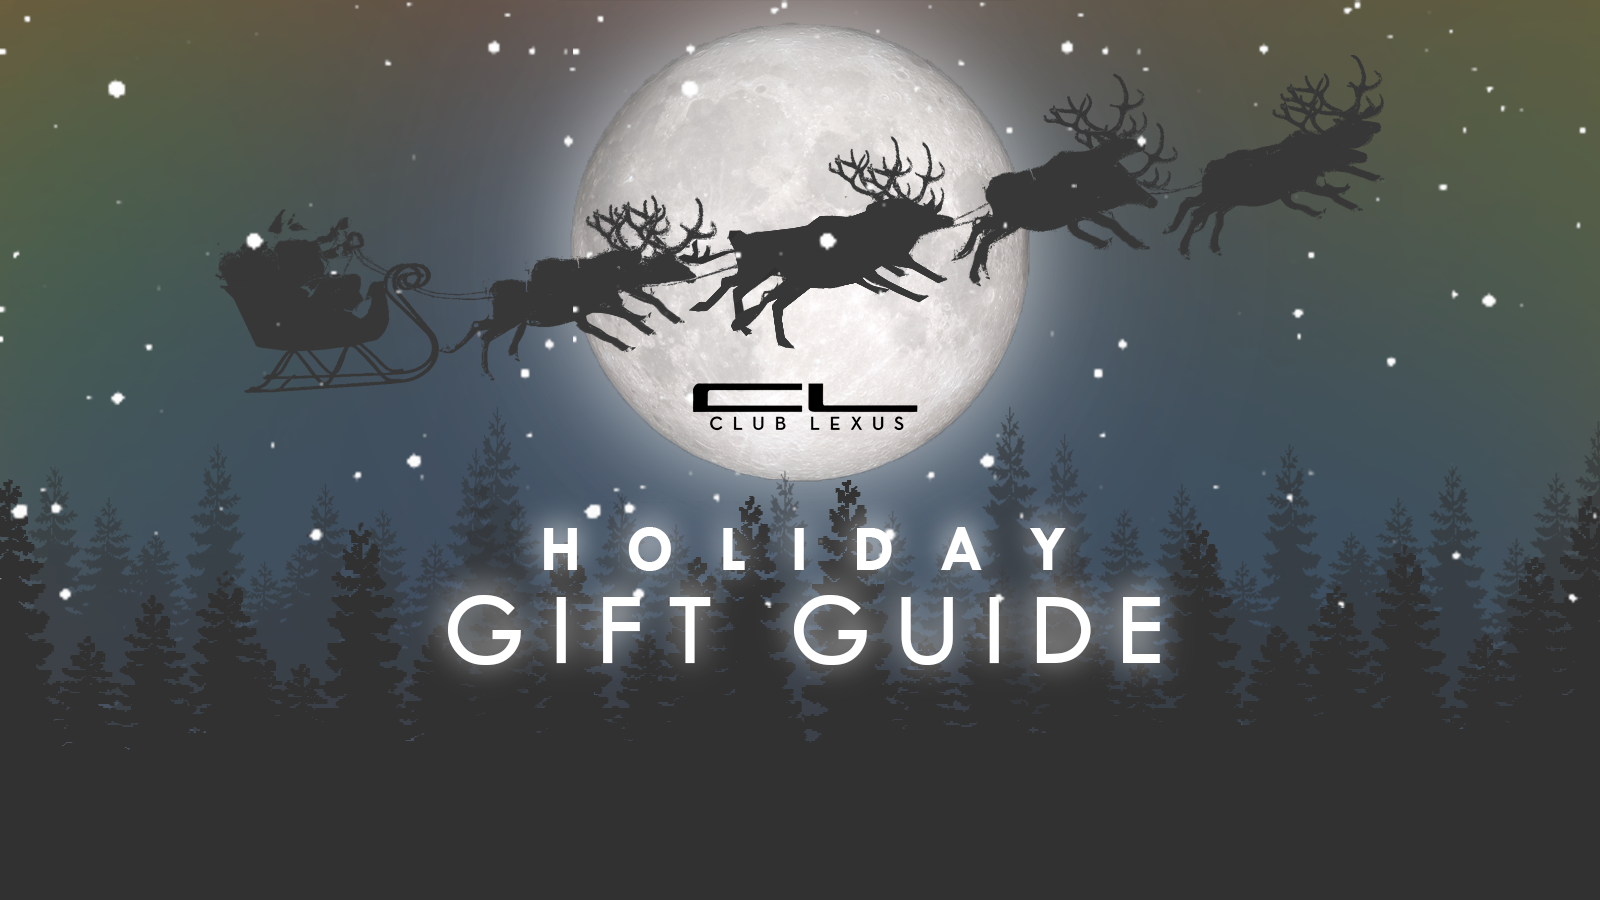 the ClubLexus 2023 holiday gift guide